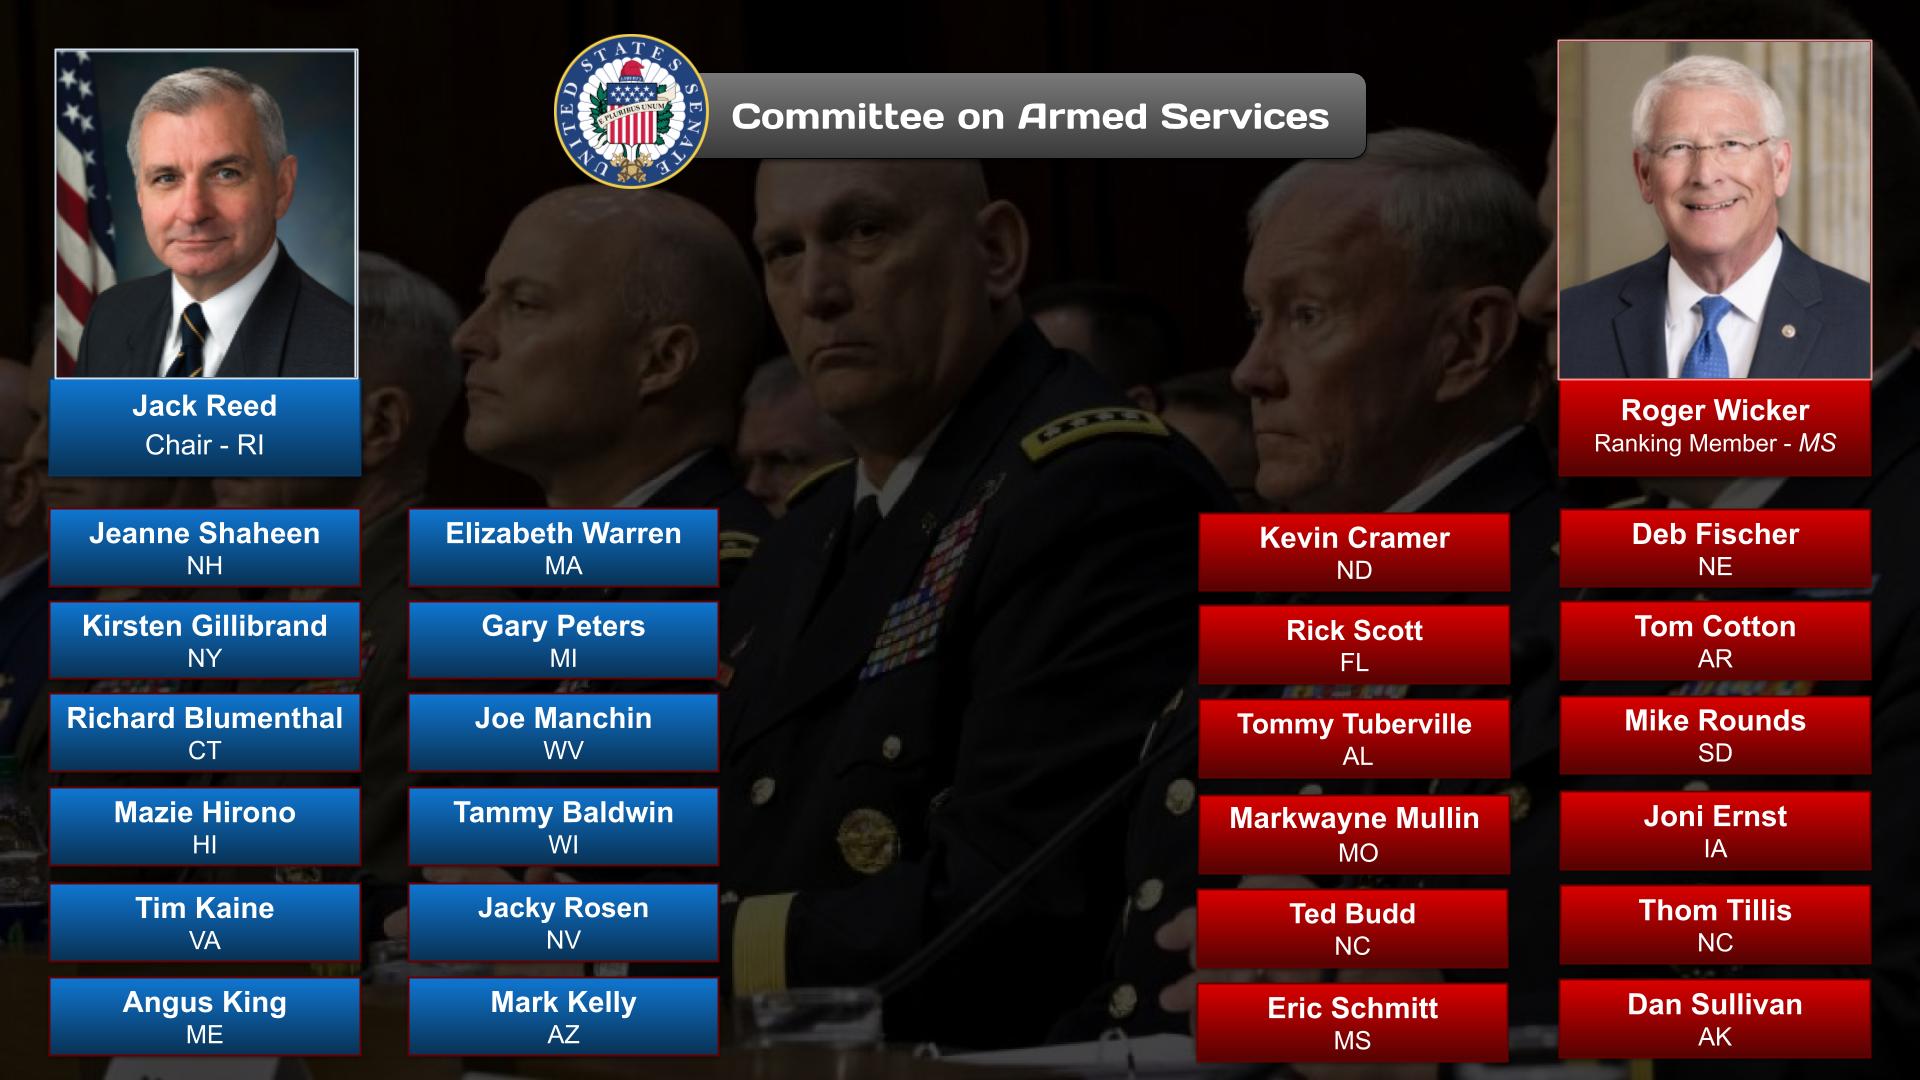 Committee on Armed Services (Senate)